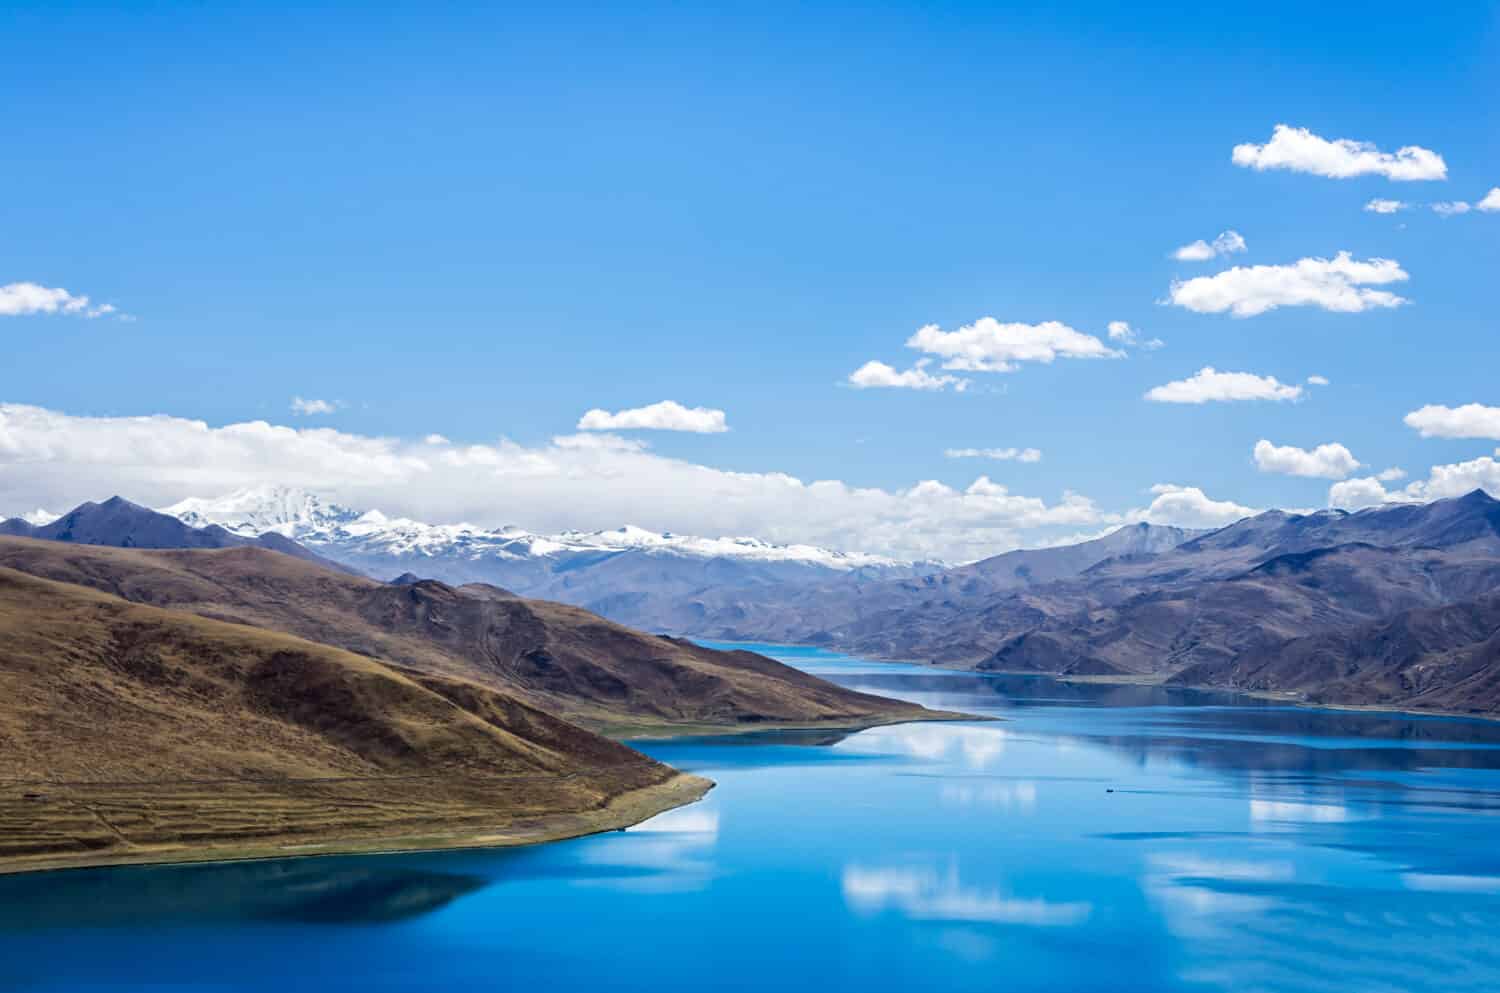 Yamdrok lake"the fifth largest lake in the Tibet,China.beautifual blue lake on Highest land with mountains under blue sky and white clouds.Landmark of Tibet.